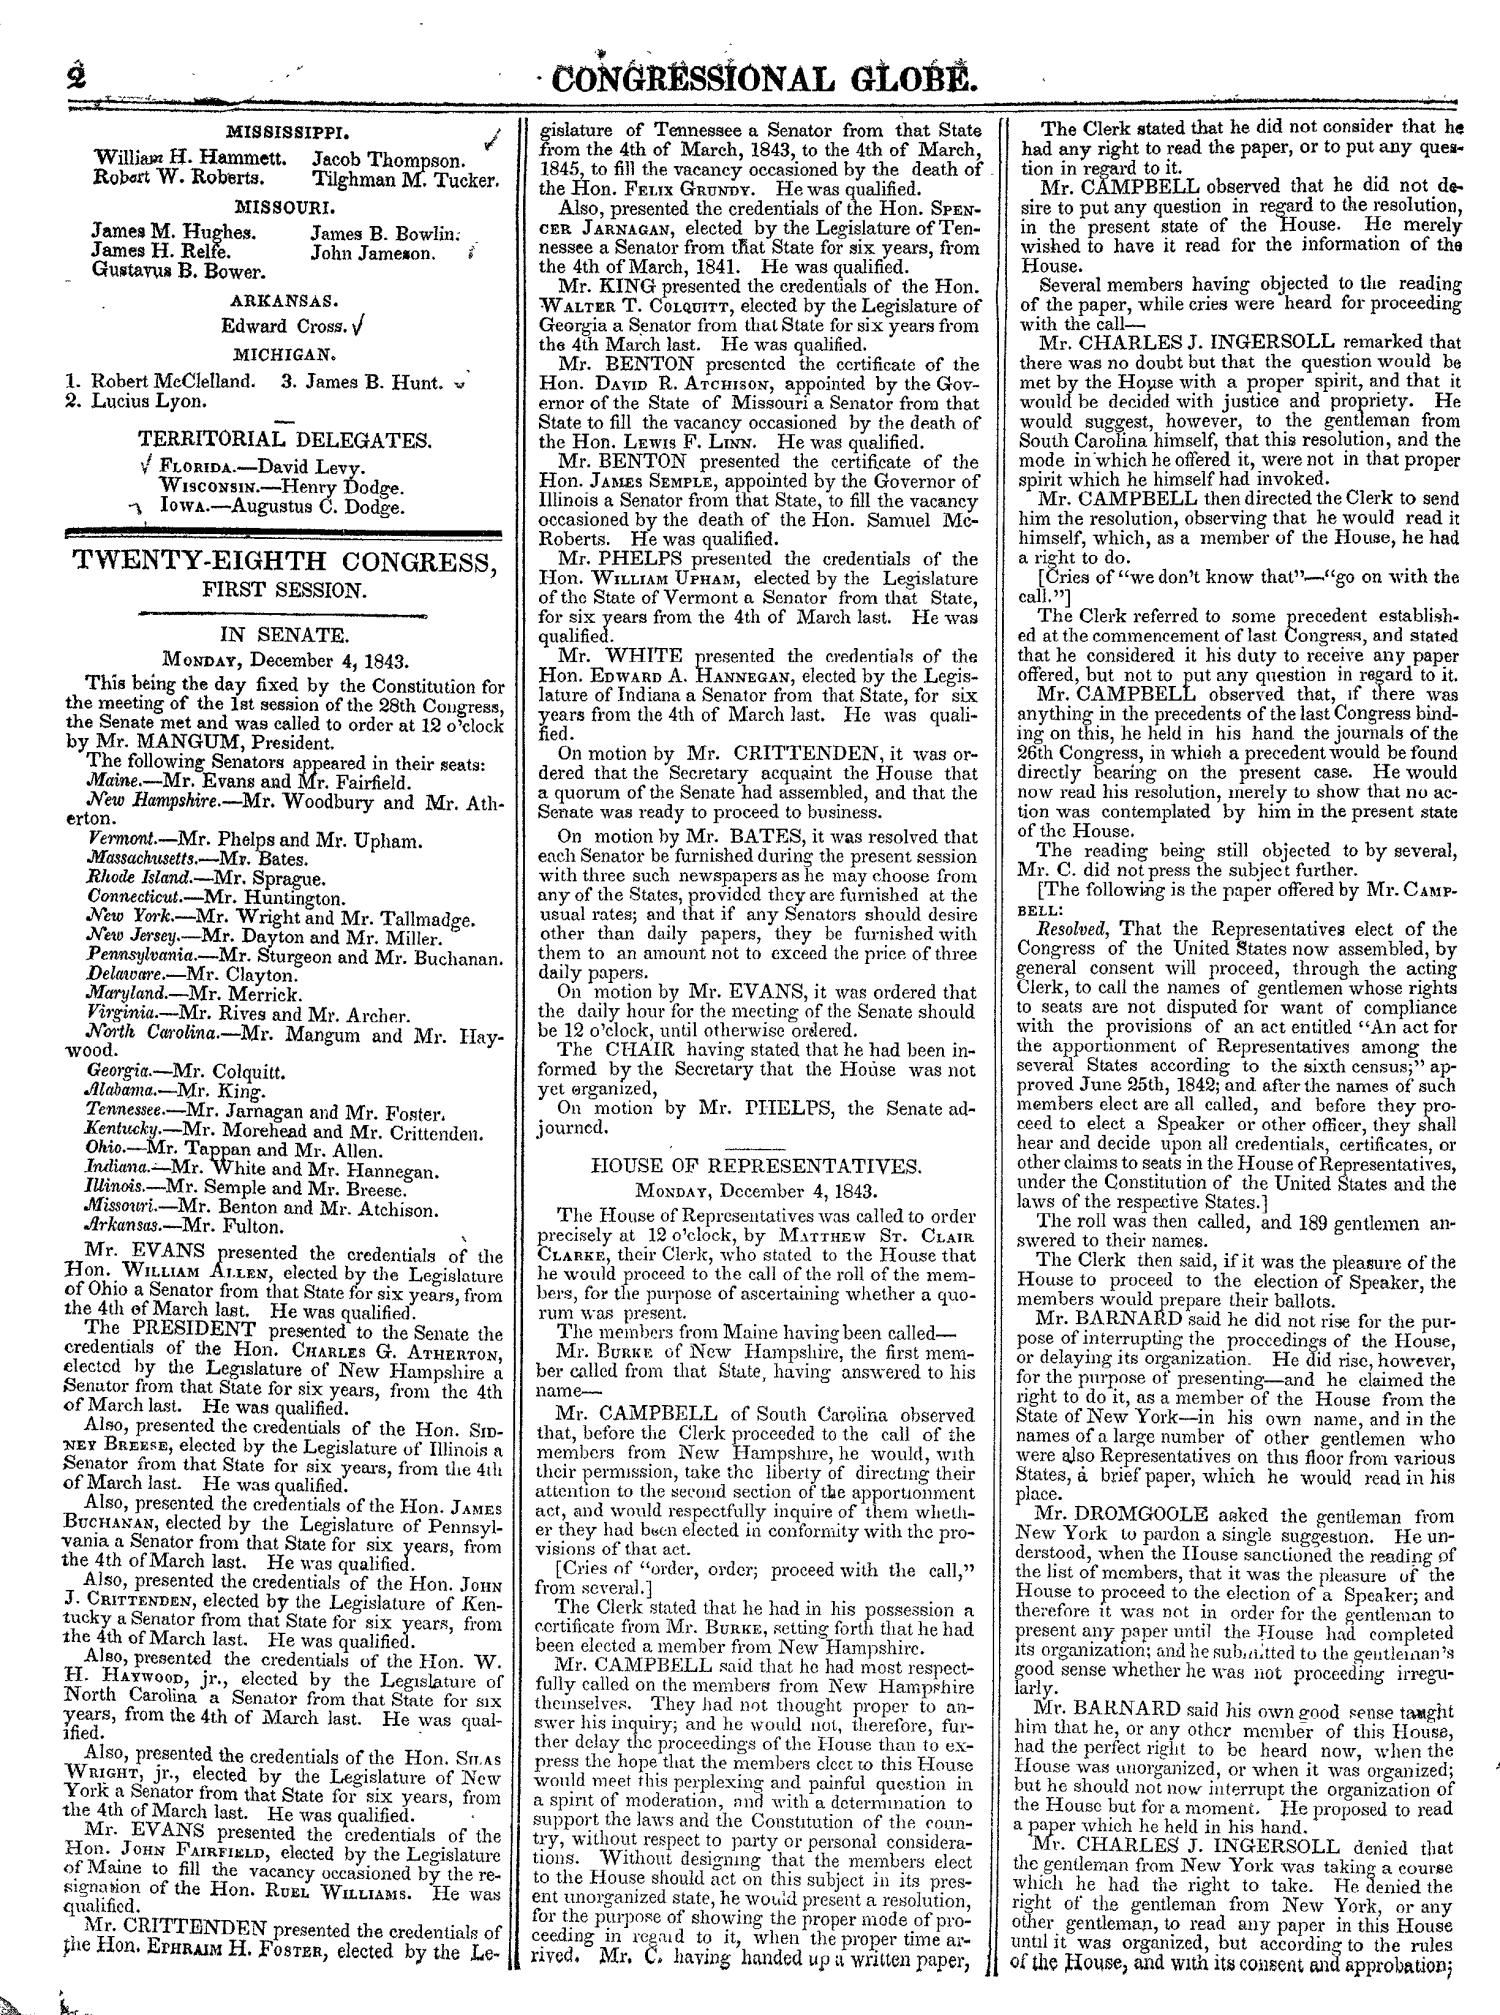 The Congressional Globe, Volume 13, Part 1: Twenty-Eighth Congress, First Session
                                                
                                                    2
                                                